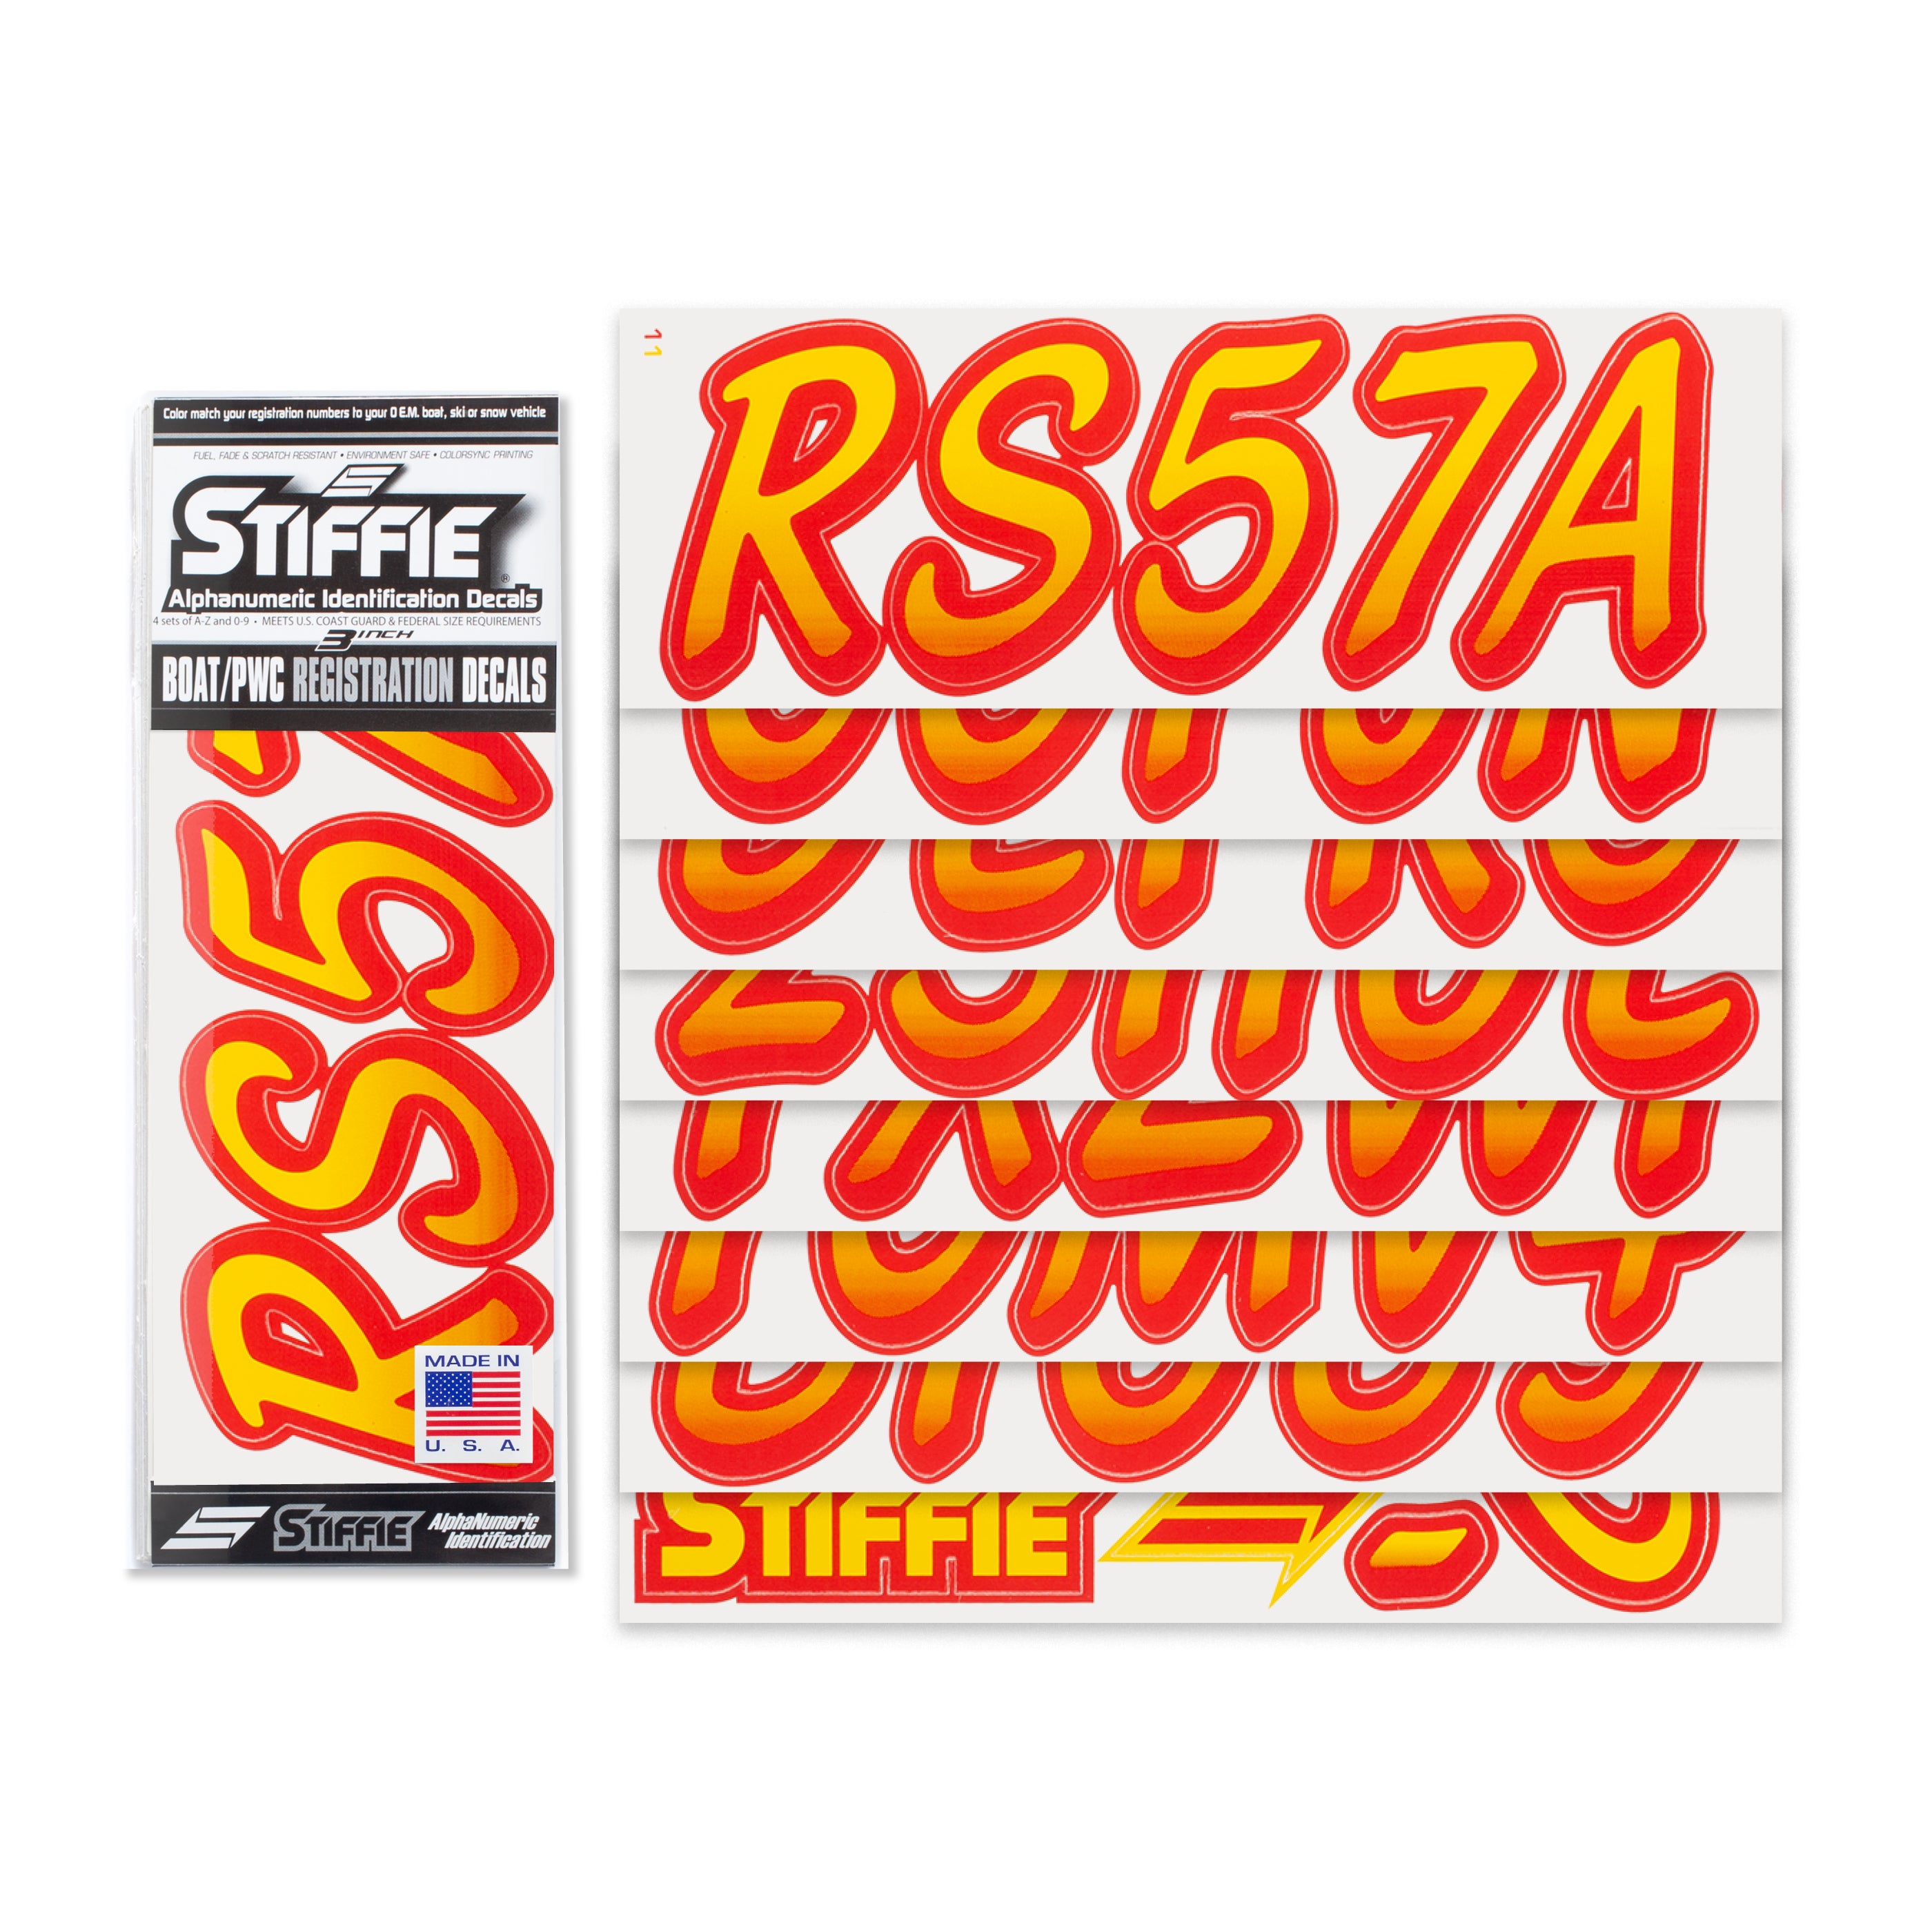 Stiffie Whipline Yellow/Red ID Kit 3" Alpha-Numeric Registration Identification Numbers Stickers Decals for Boats & Personal Watercraft